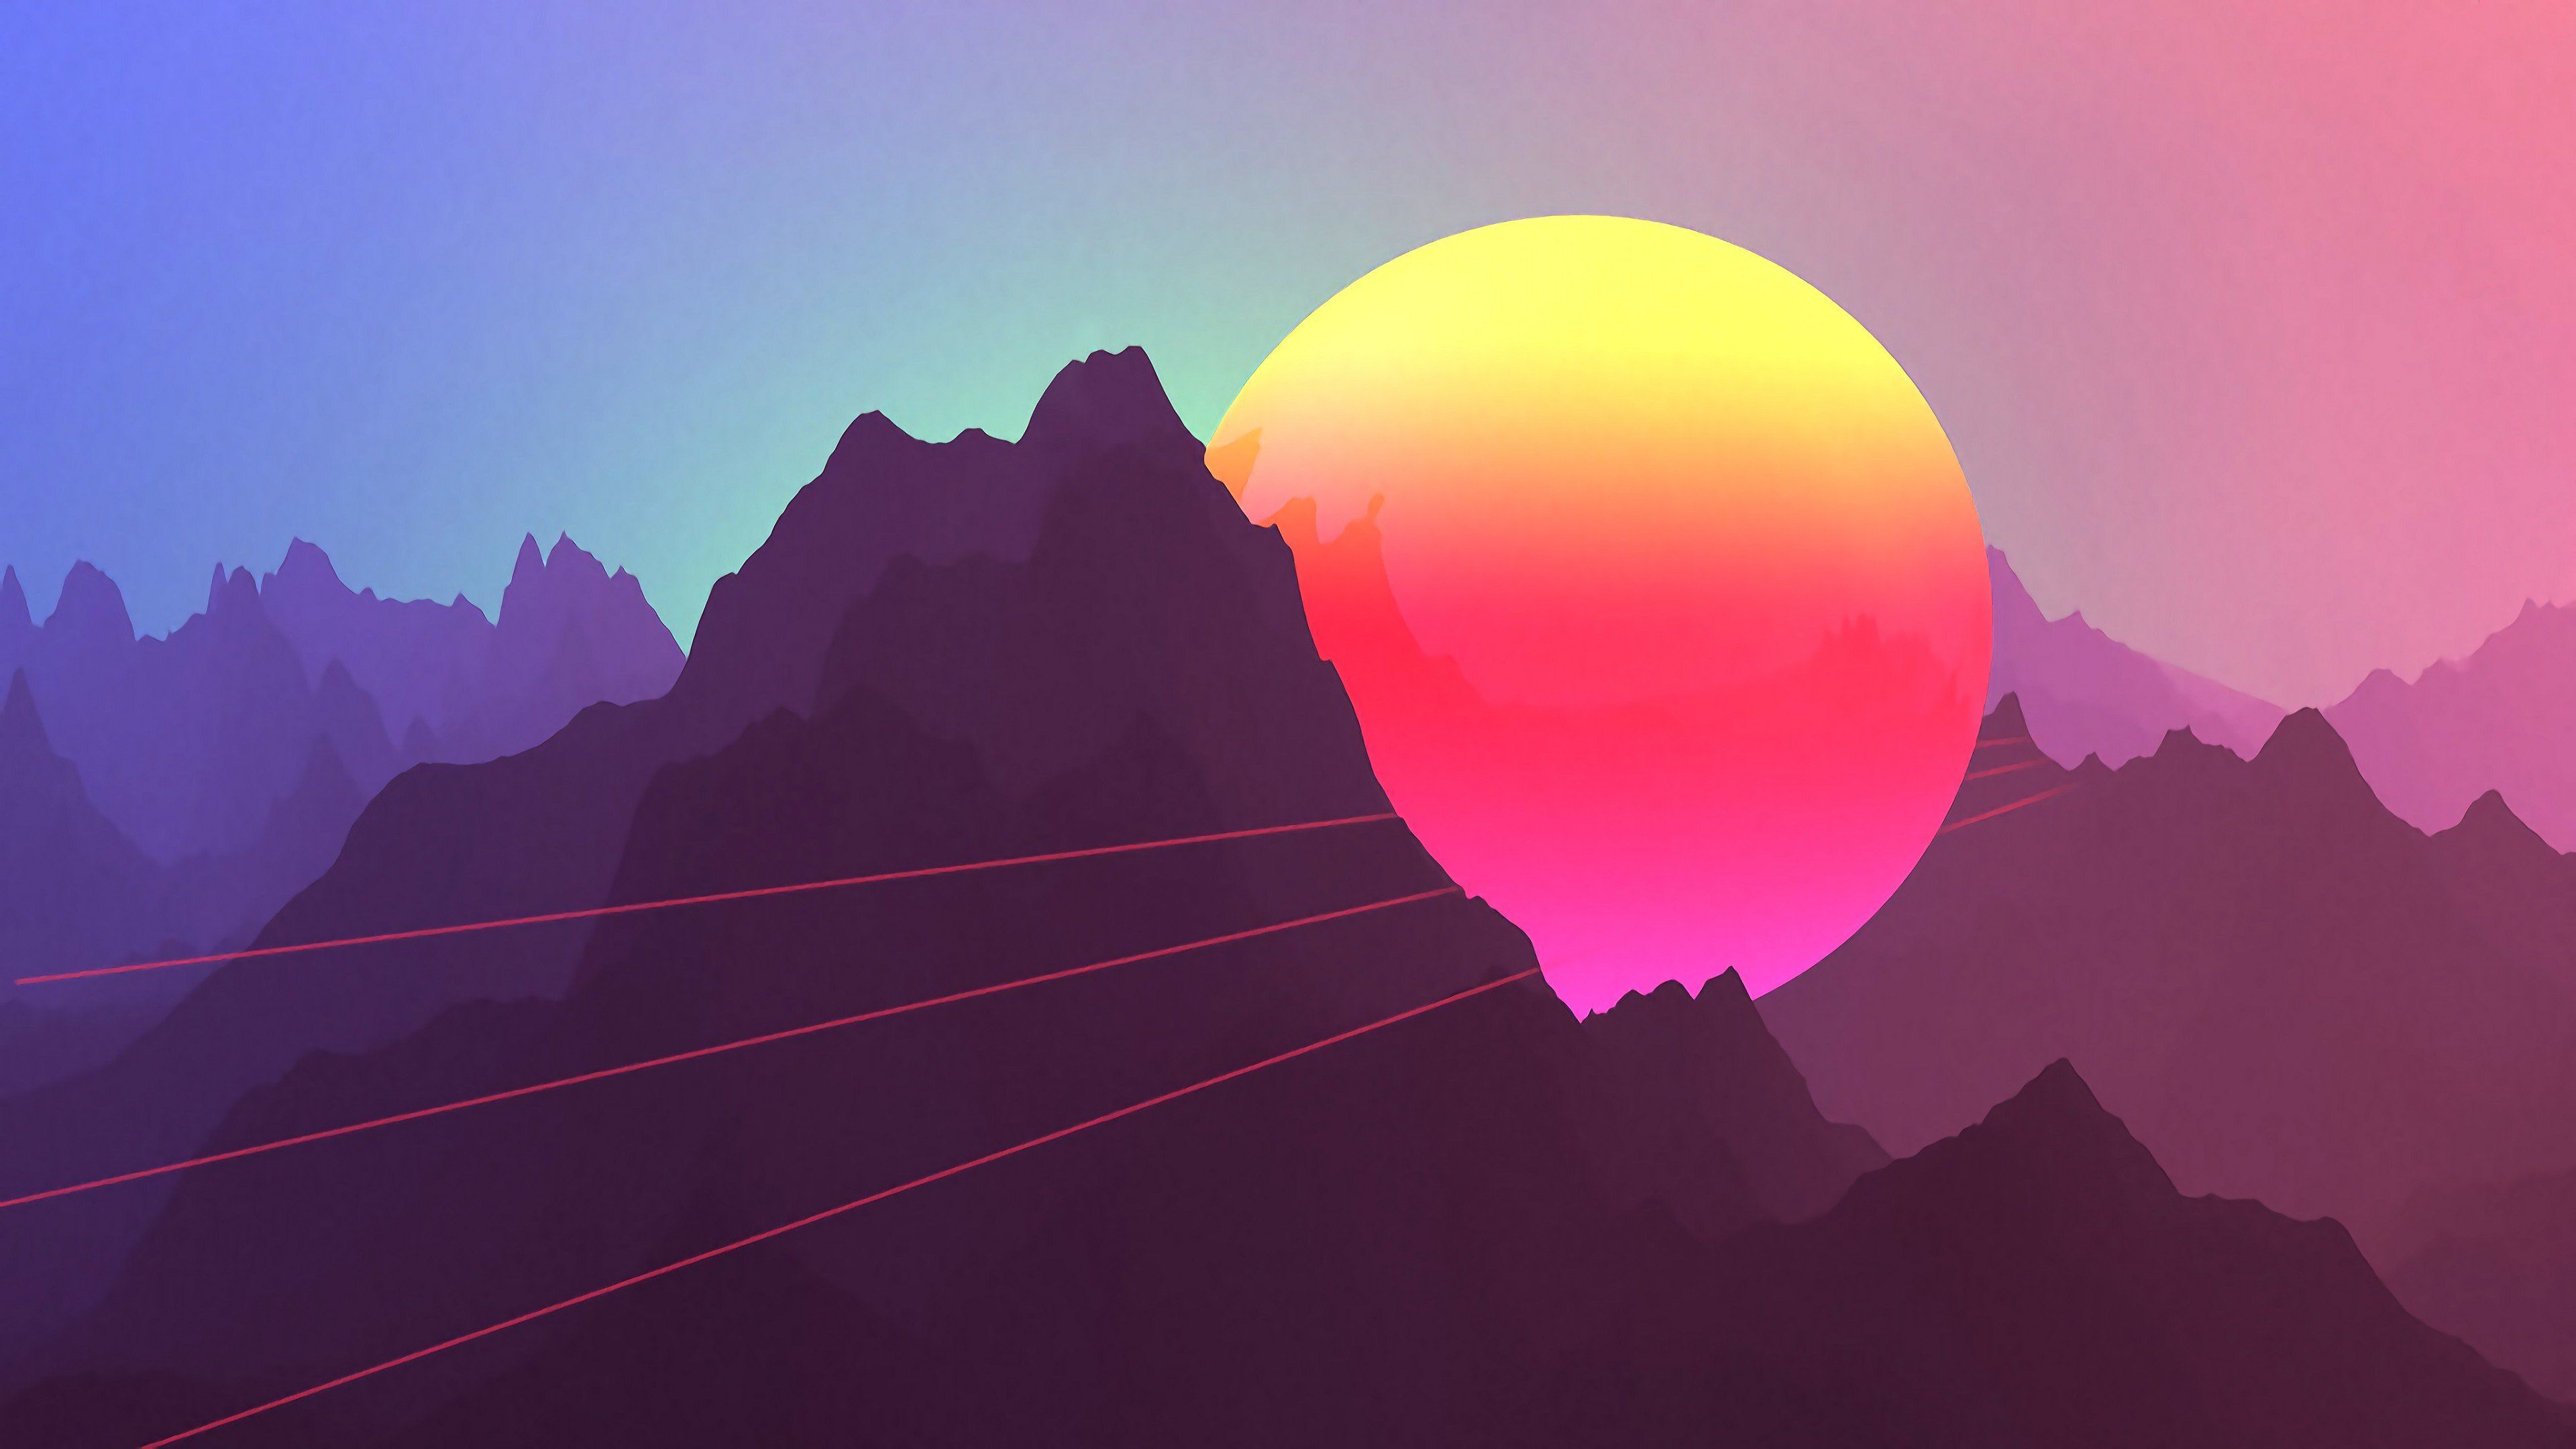 Sunset in the mountains with laser beams - 3840x2160, Windows 10